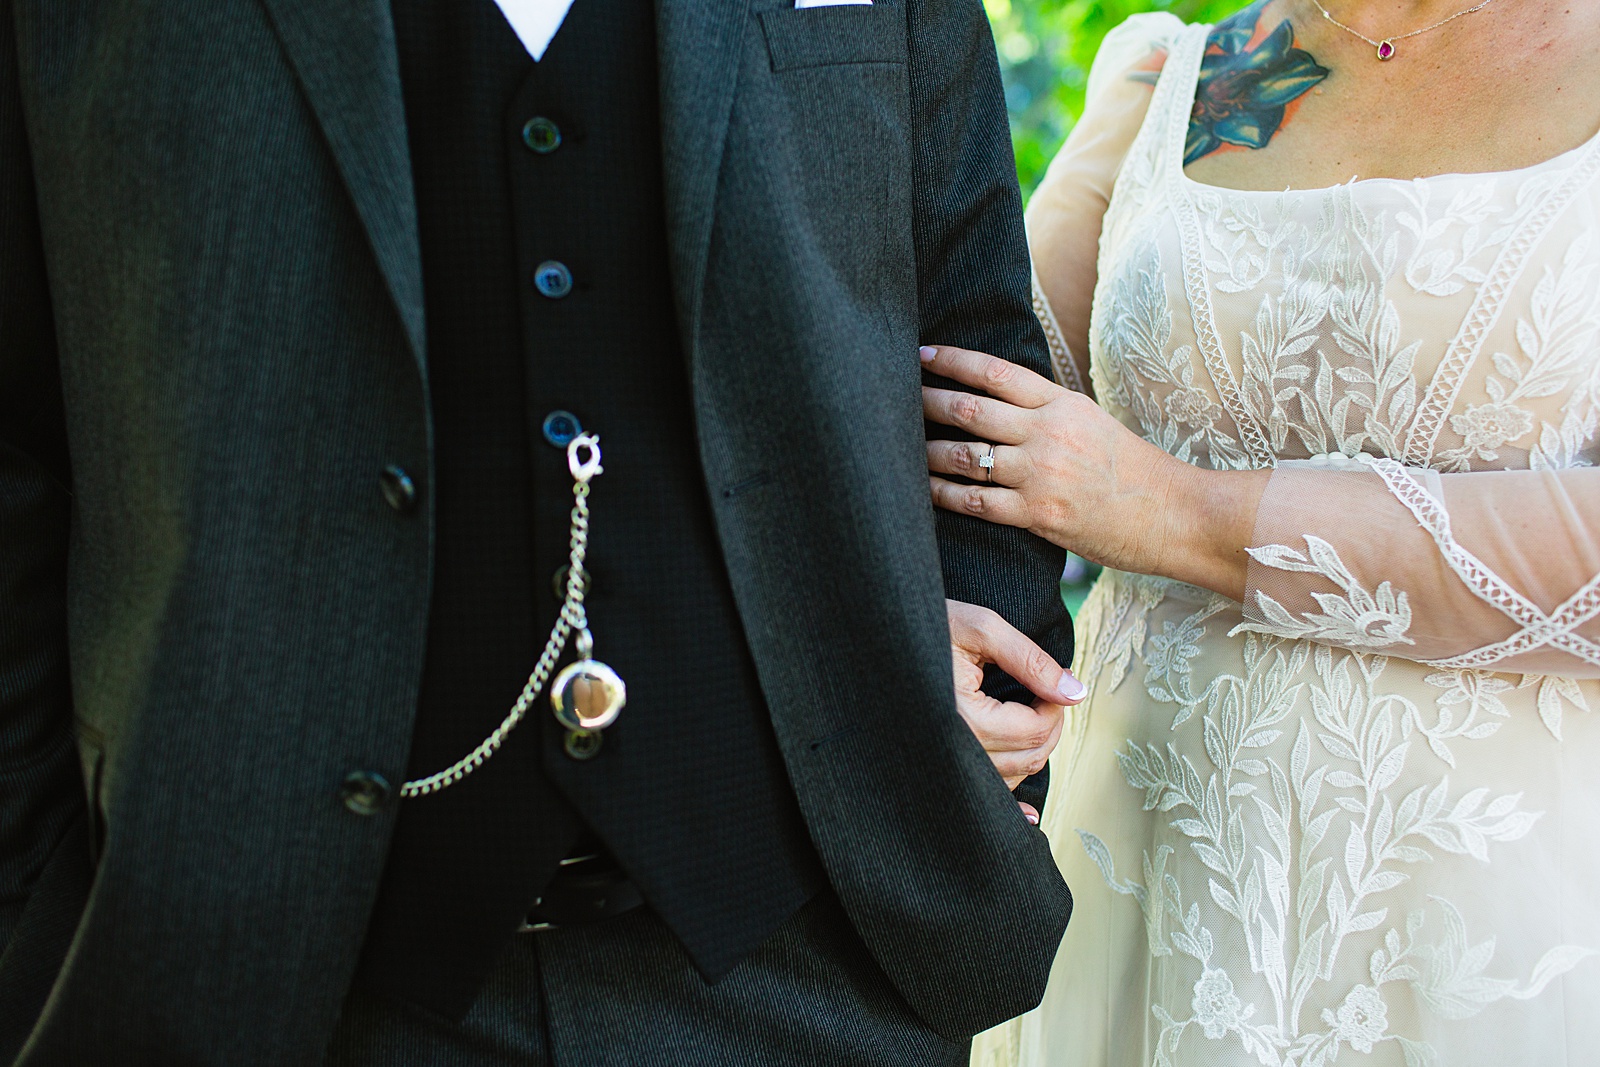 Bride and groom wedding day outfit details by PMA Photography.